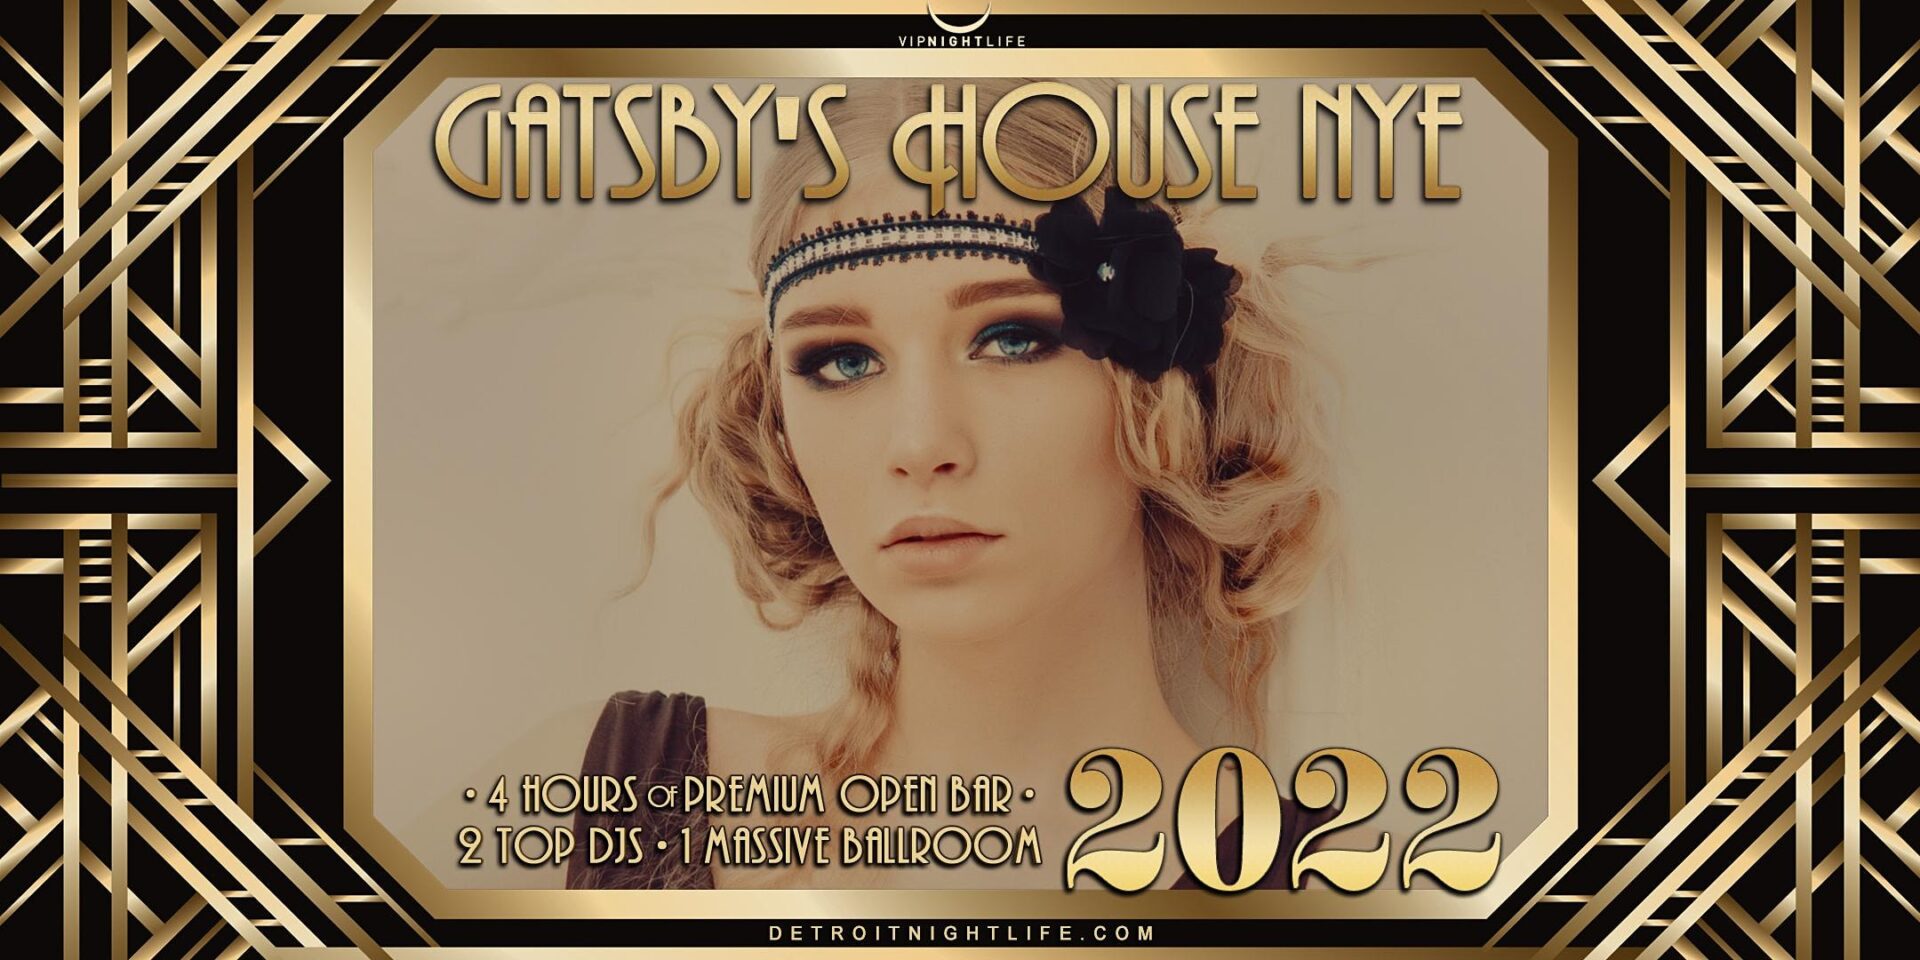 2022 Detroit New Year's Eve Party Gatsby's House VIP Nightlife